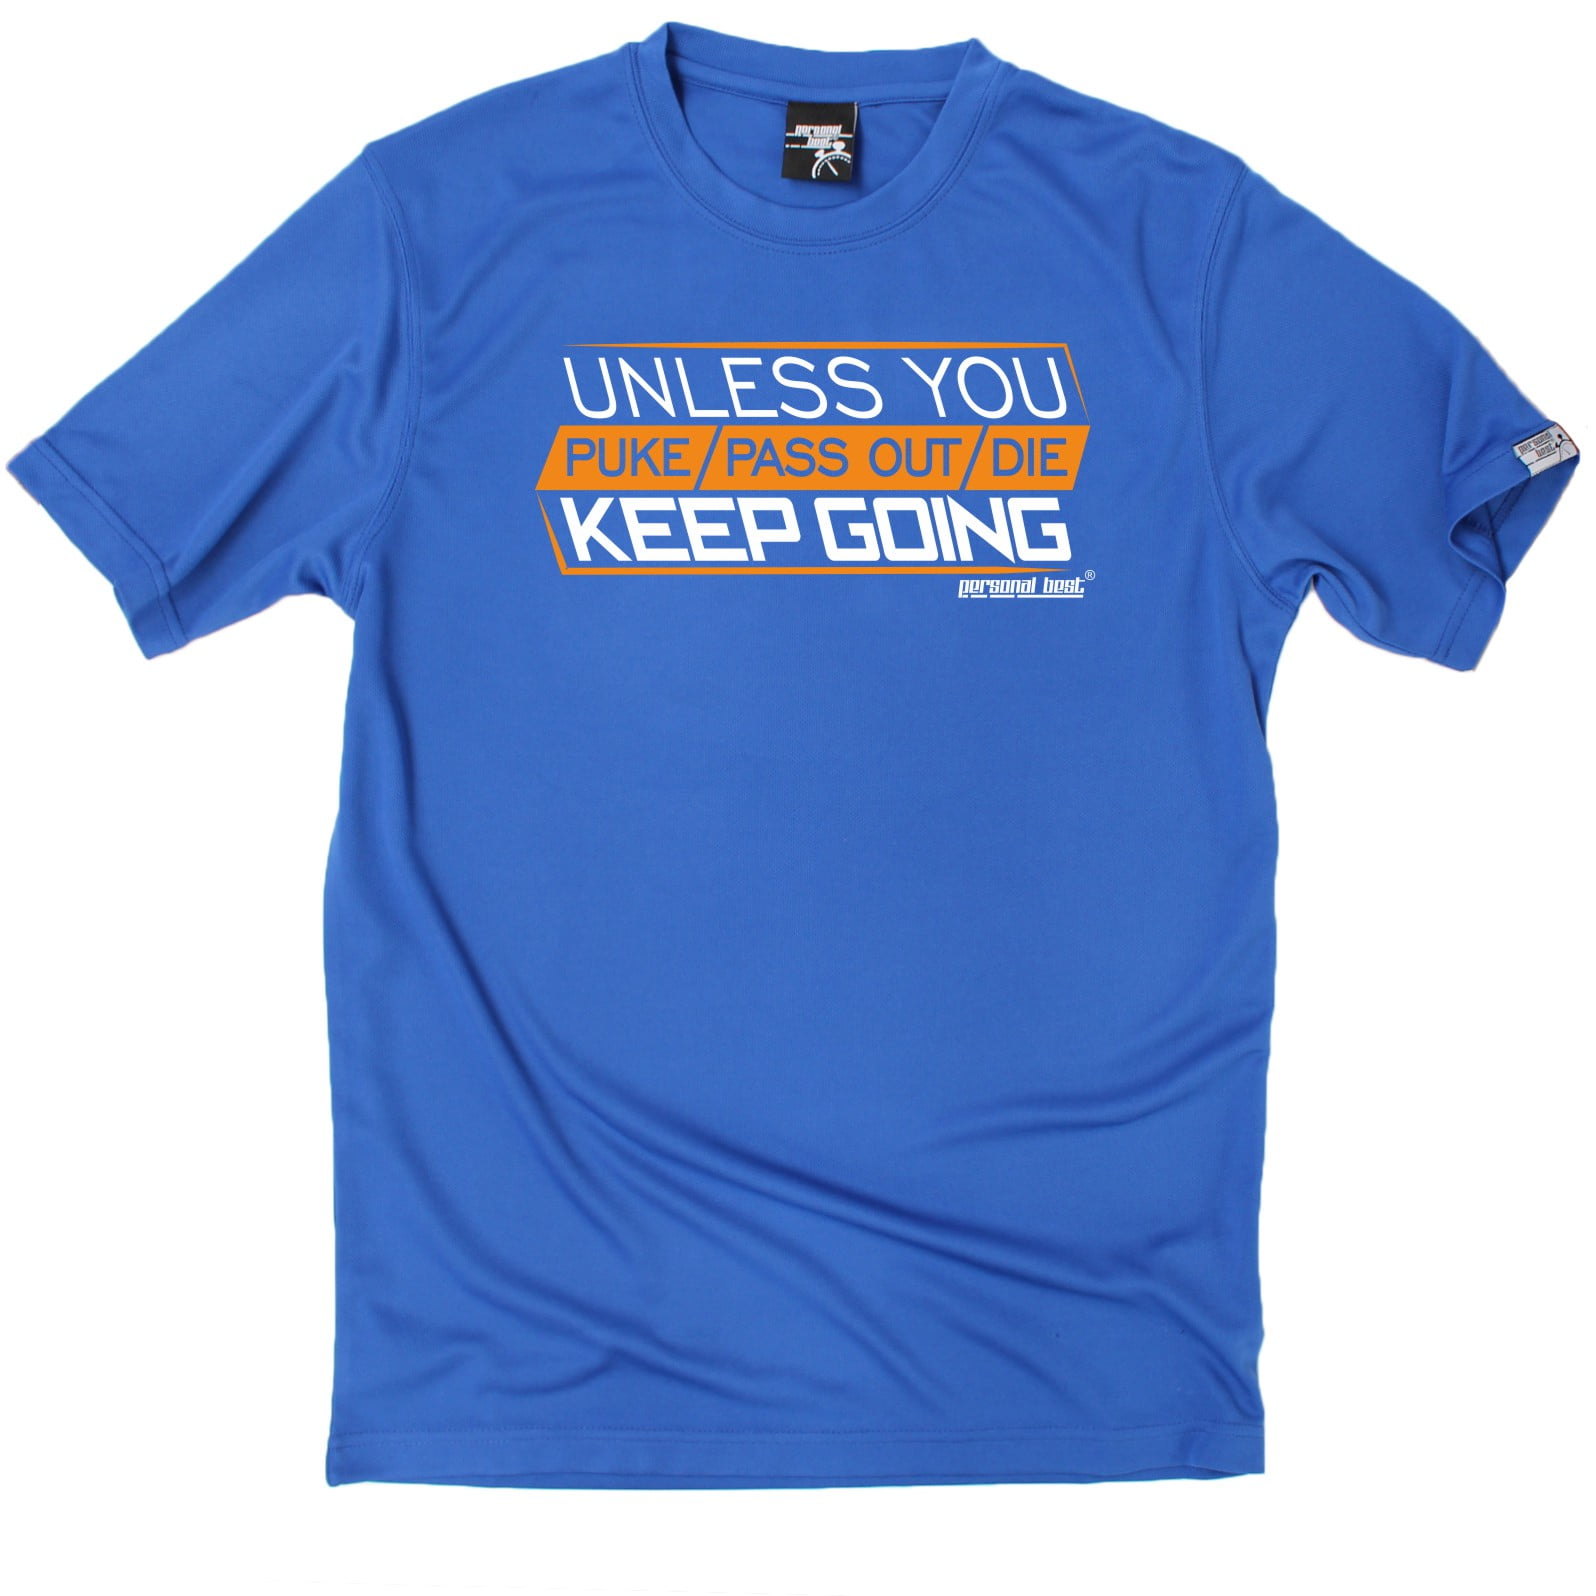 Unless You Puke Pass Out Keep Going HOODIE hoody birthday gift fashion running